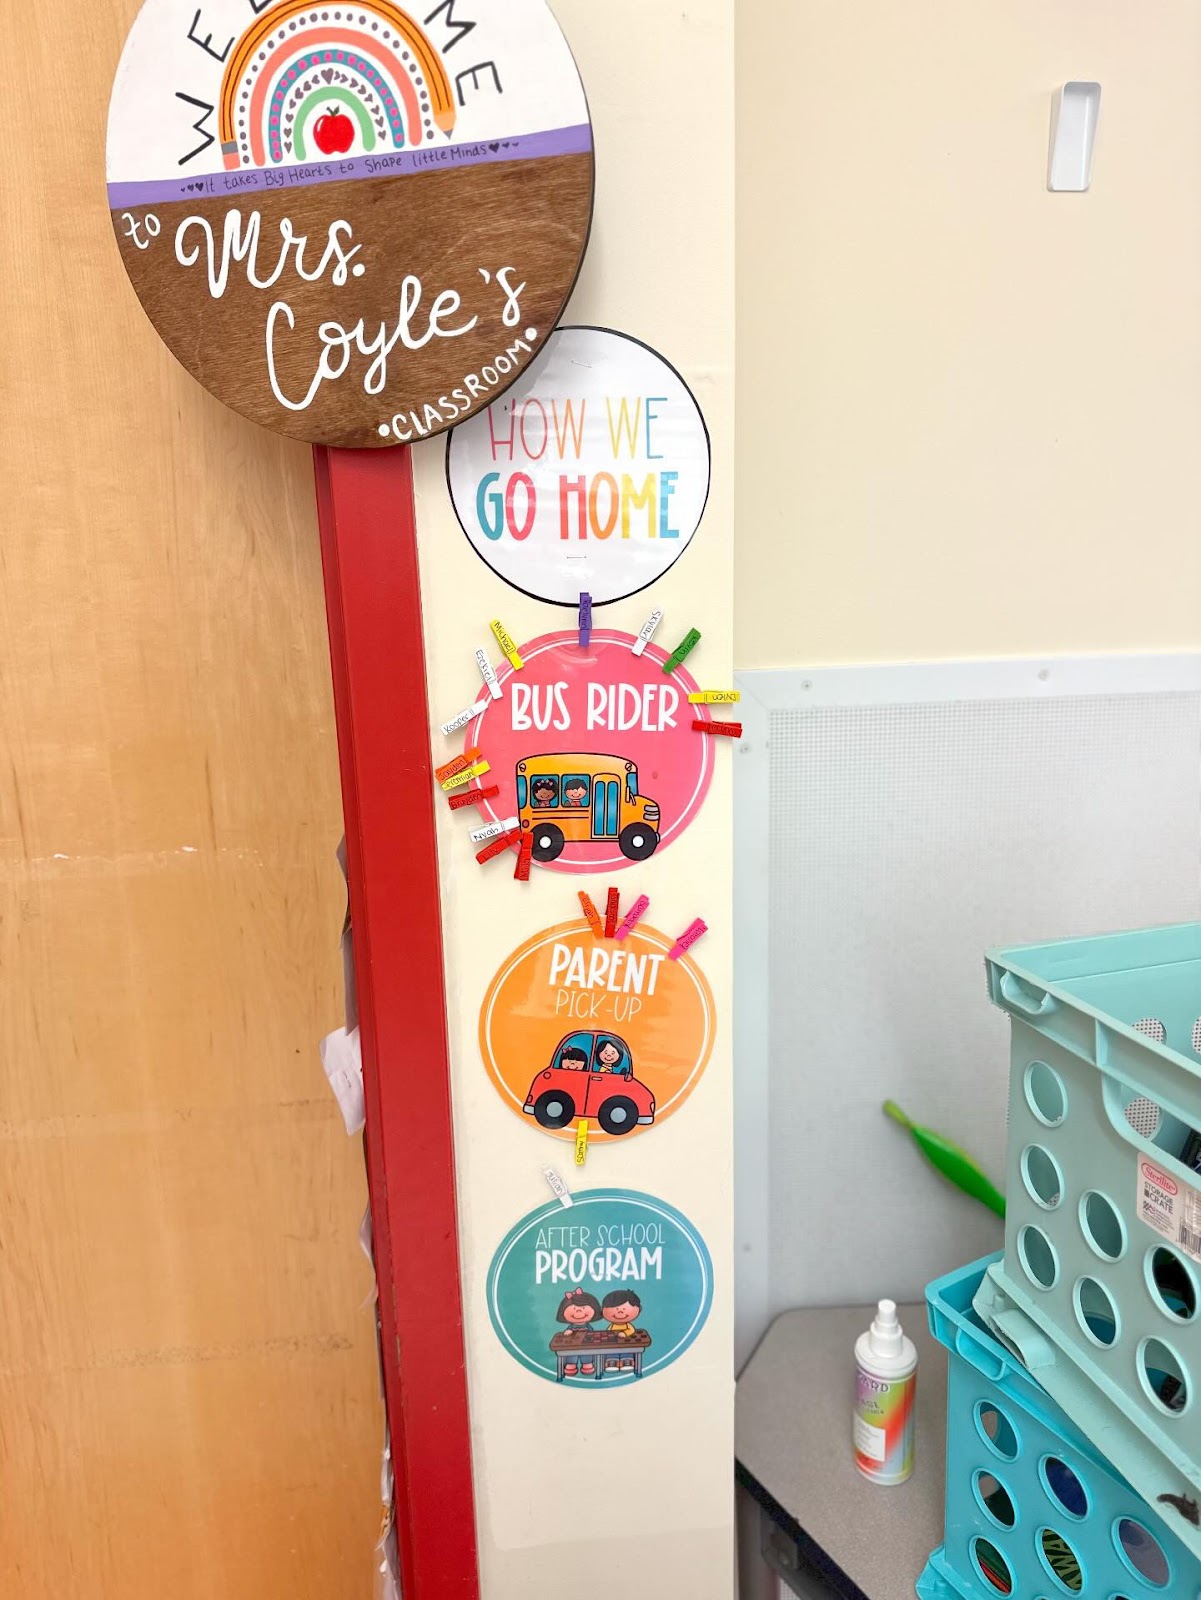 This image shows an inspiring classroom decor "How we go home" setup. There are four cut out circles that read "How we go home" and provide three different options - bus, parent, or after-school program. There are clothespins around the options. 